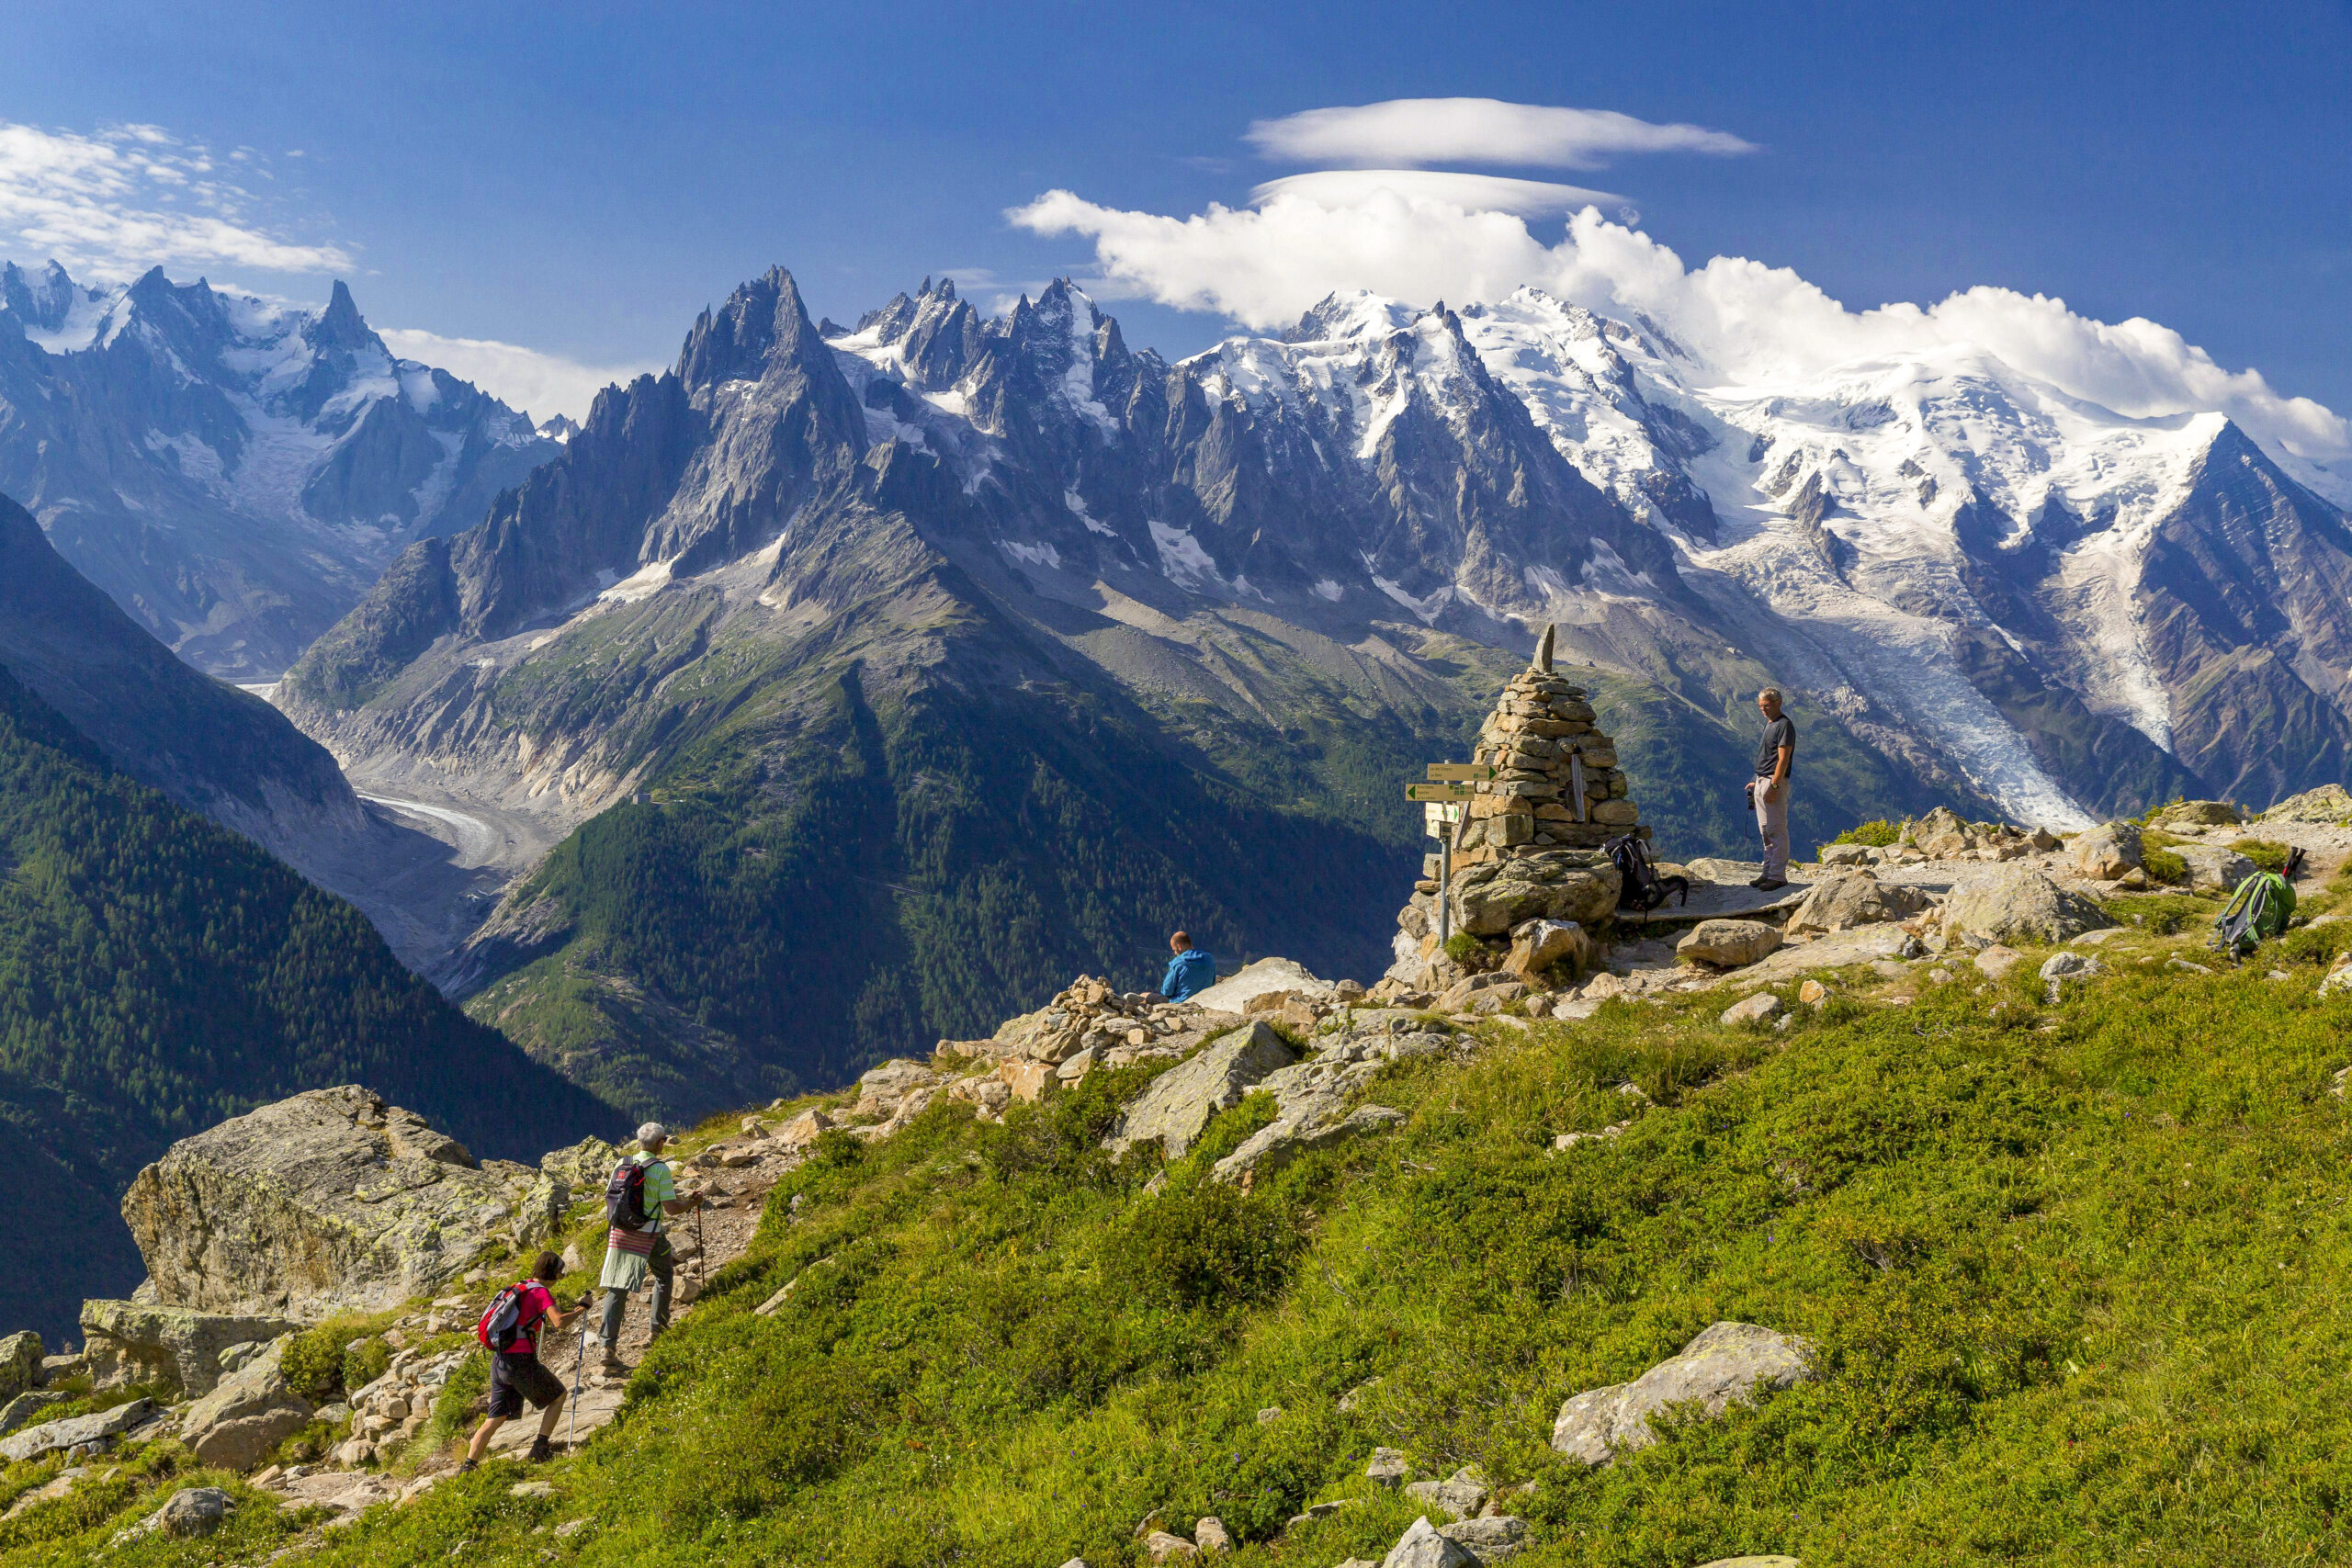 https://www.wildernesstravel.com/wp-content/uploads/2023/06/thumb-hikers-haute-route-alps-trail-mountain-pass-snow-capped-peaks-scaled.jpg